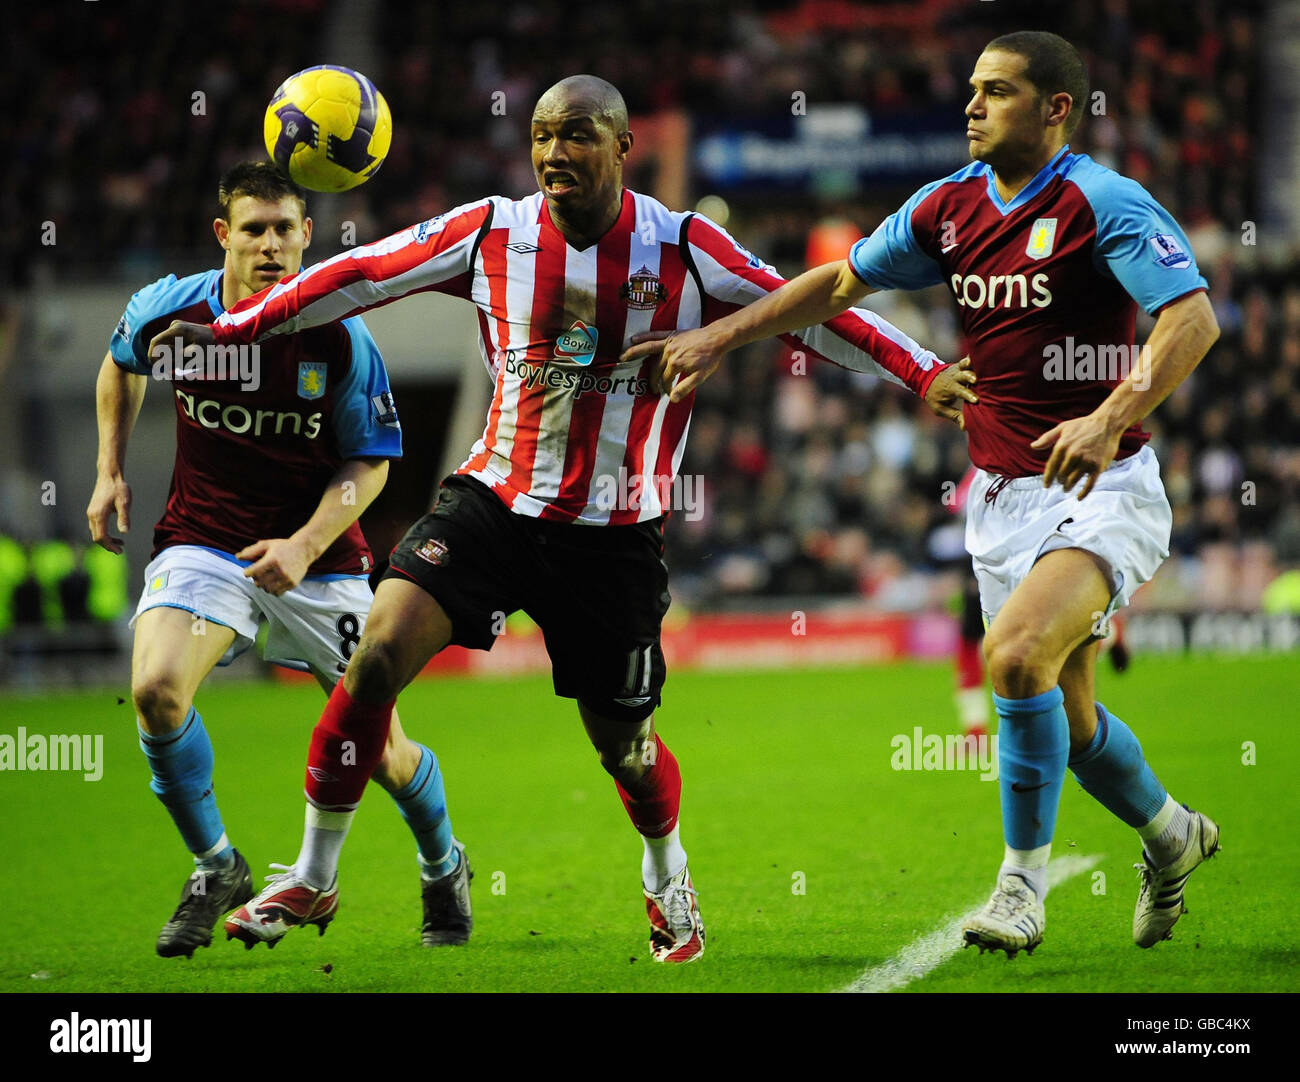 Sunderland's El-Hadji Douf and Aston Villa's James Milner and Luke Young during the Barclays Premier League match at the Stadium of Light, Sunderland. Stock Photo